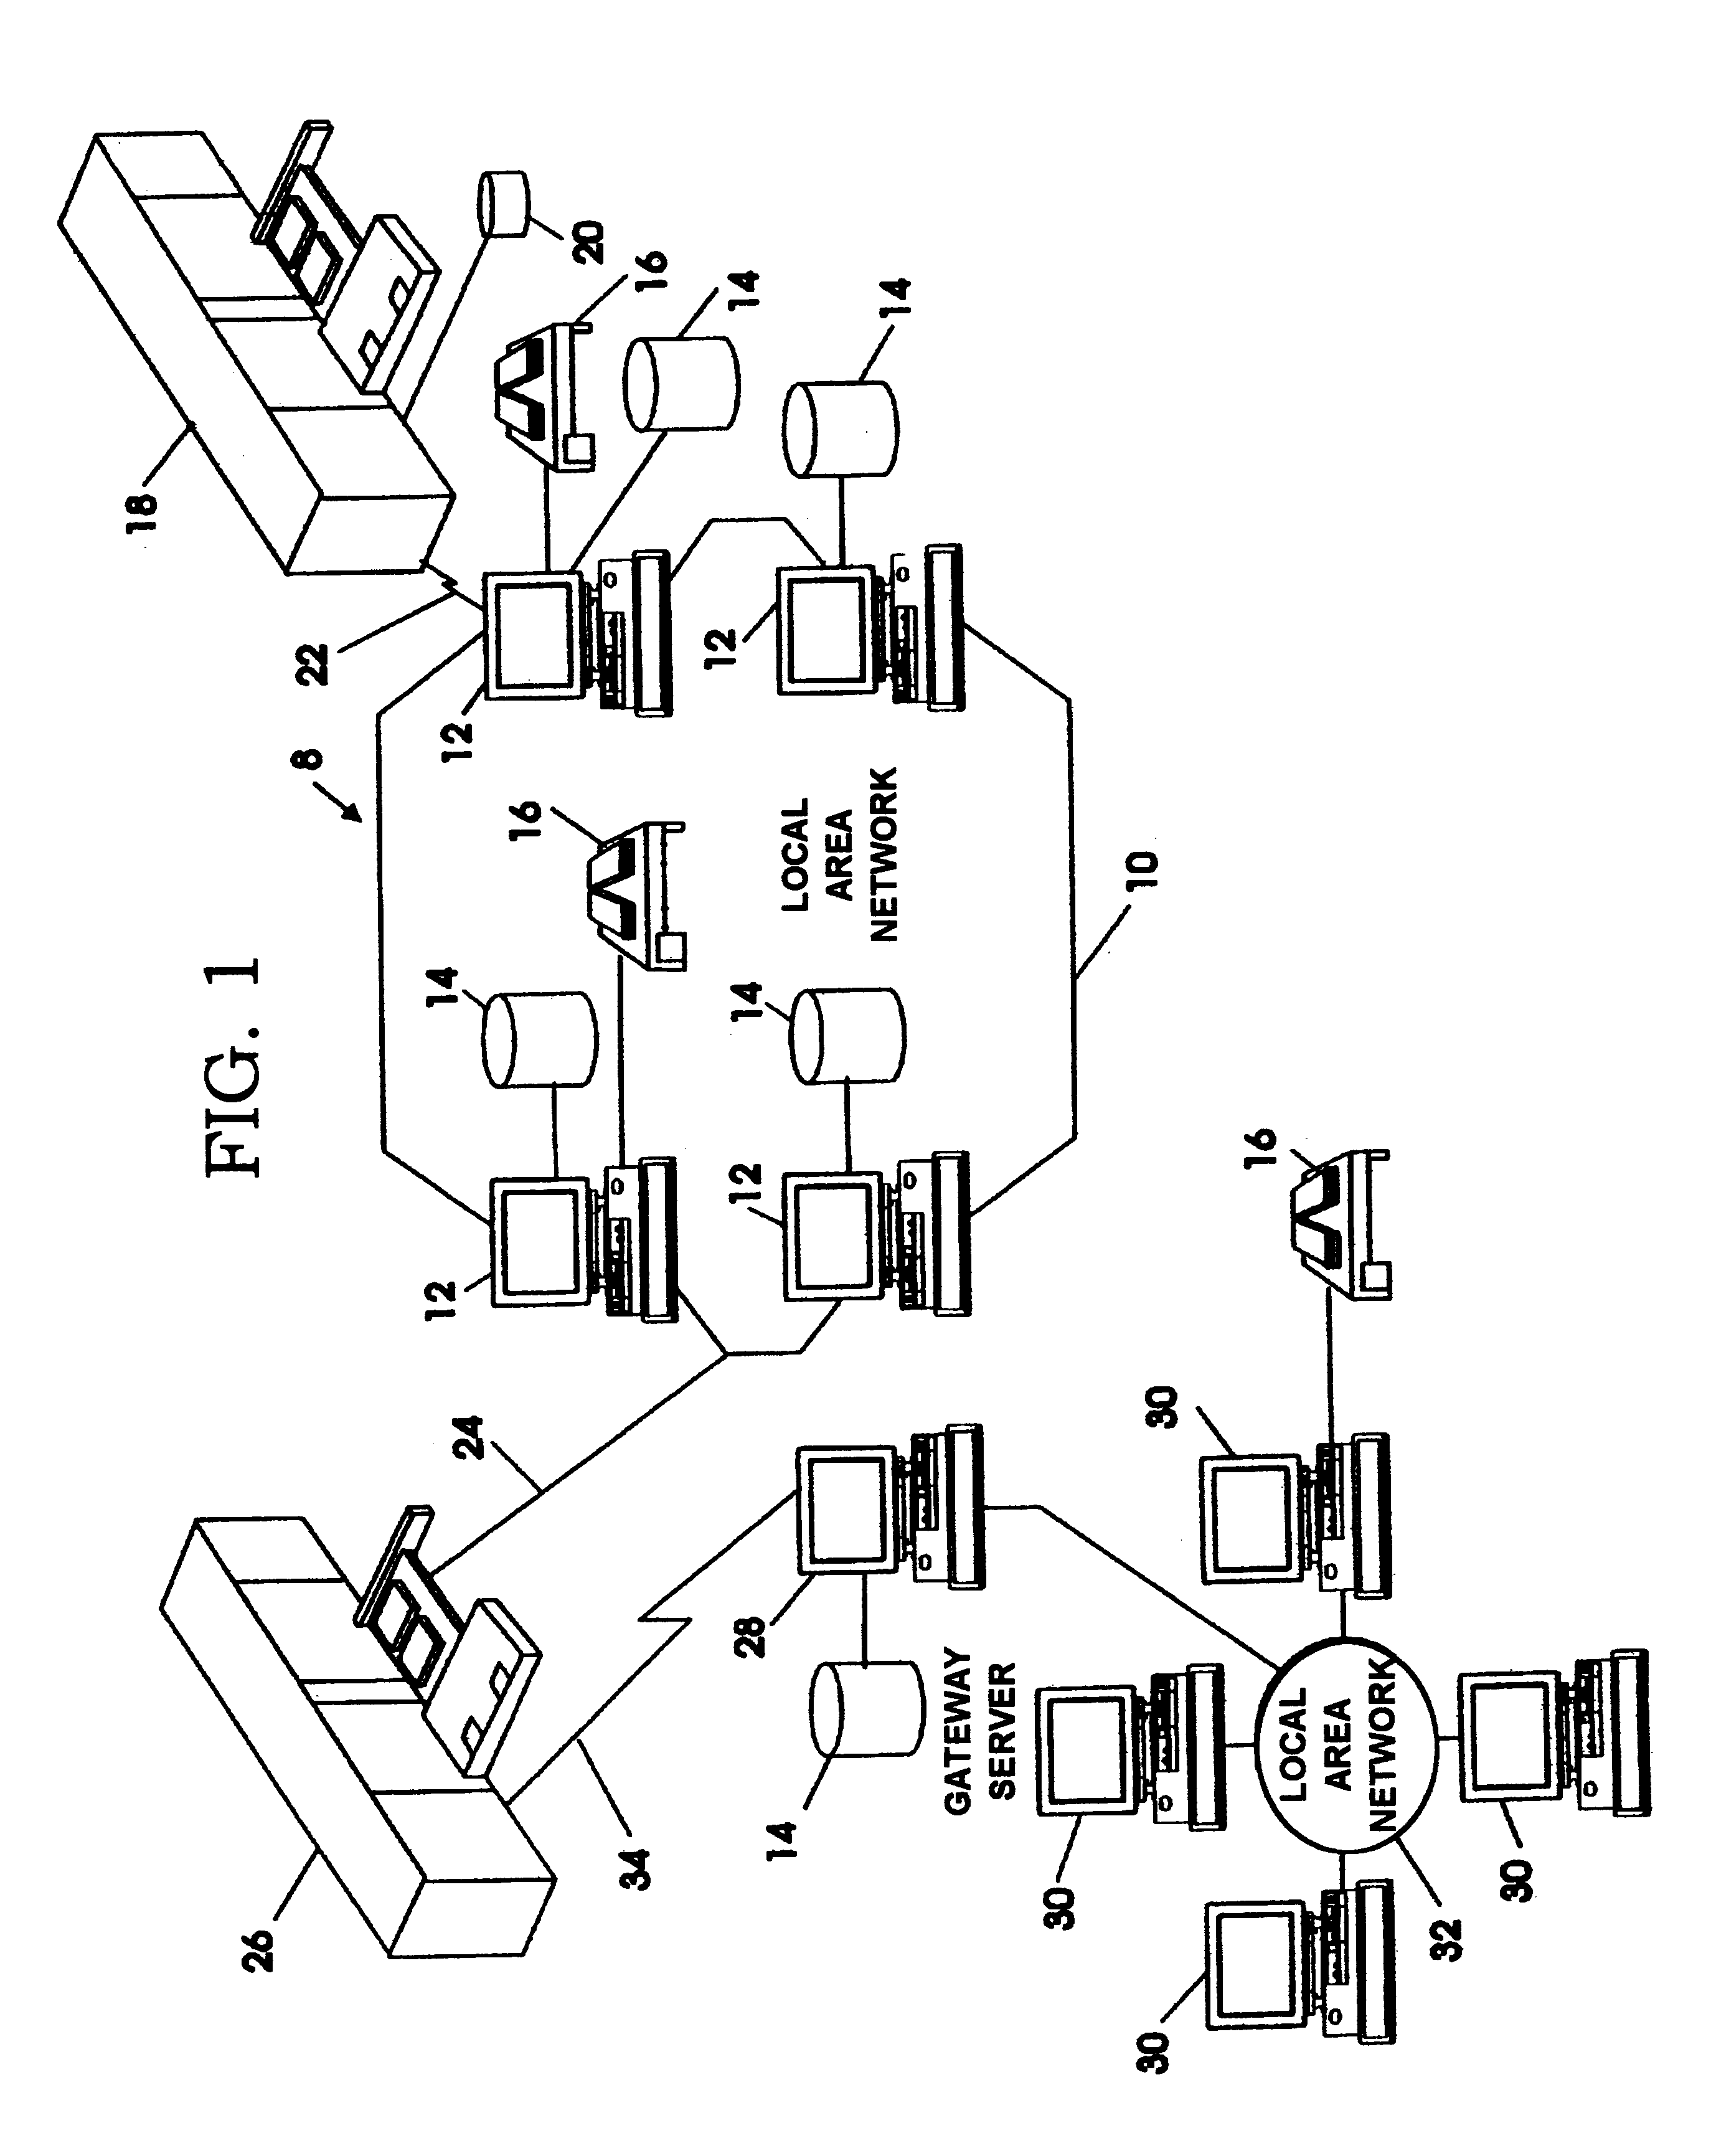 System and method for generating unsupported network information indicators